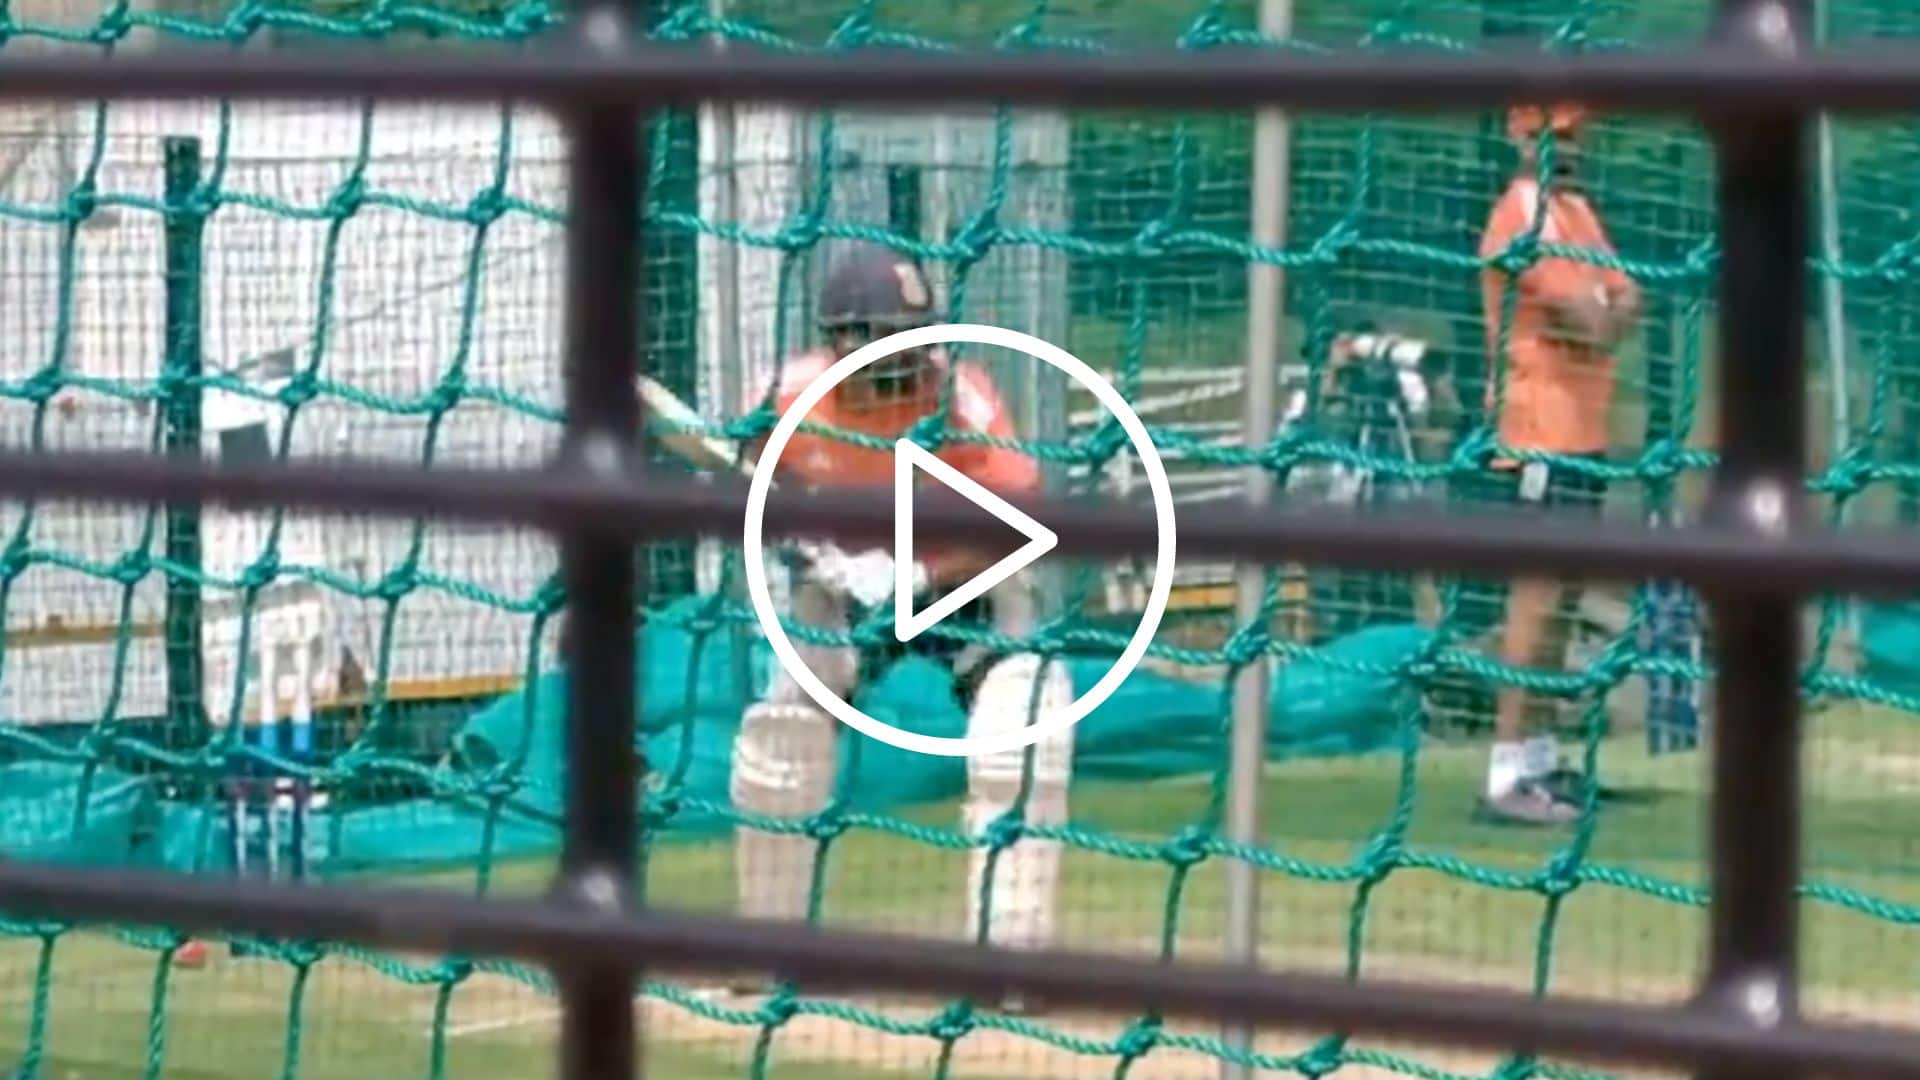 [Watch] Rohit Sharma's Intensive Net Session Ahead of 2nd Test in Cape Town